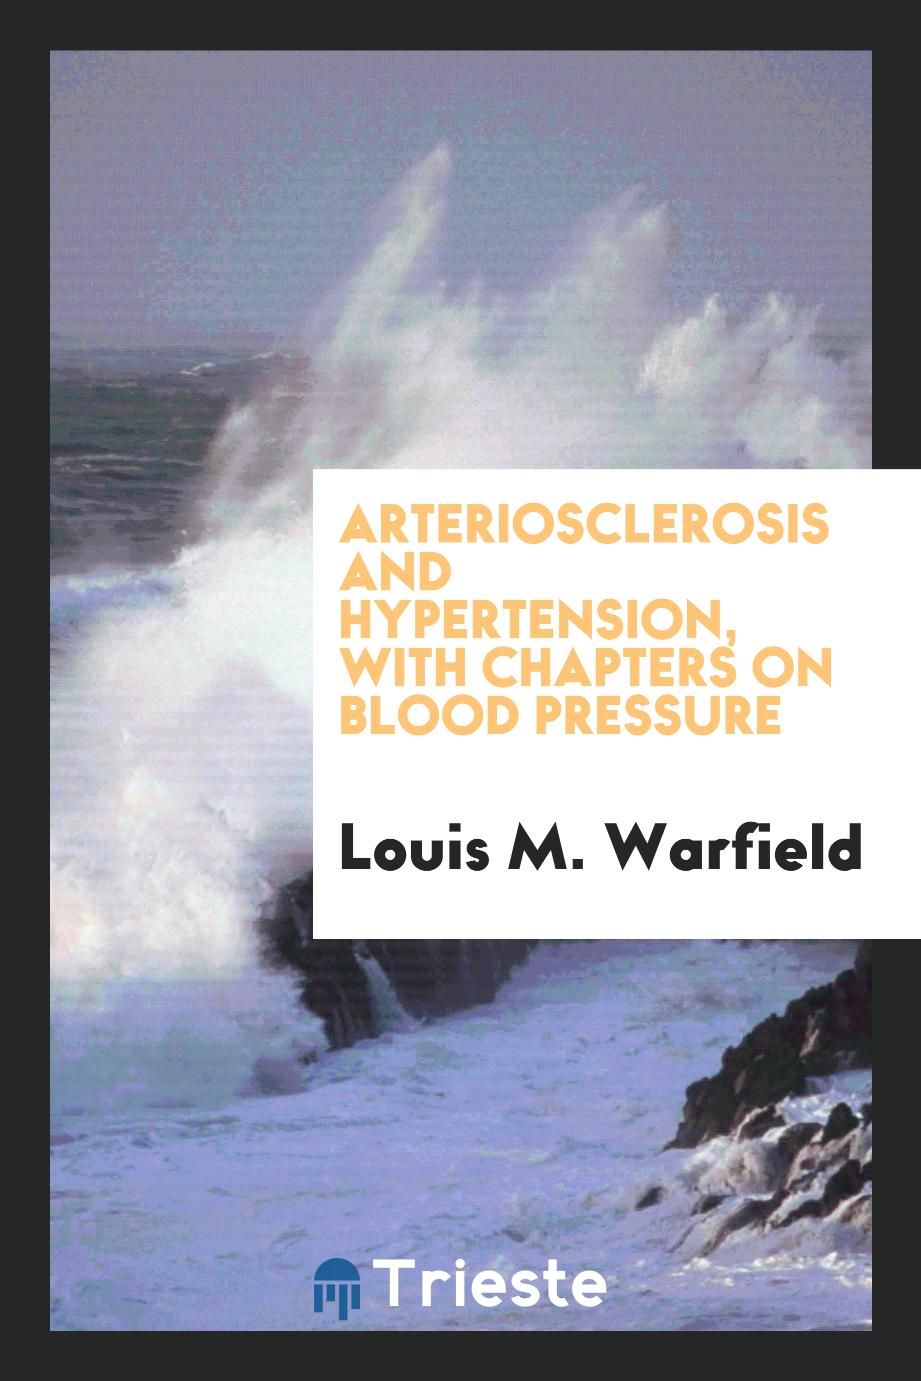 Arteriosclerosis and hypertension, with chapters on blood pressure